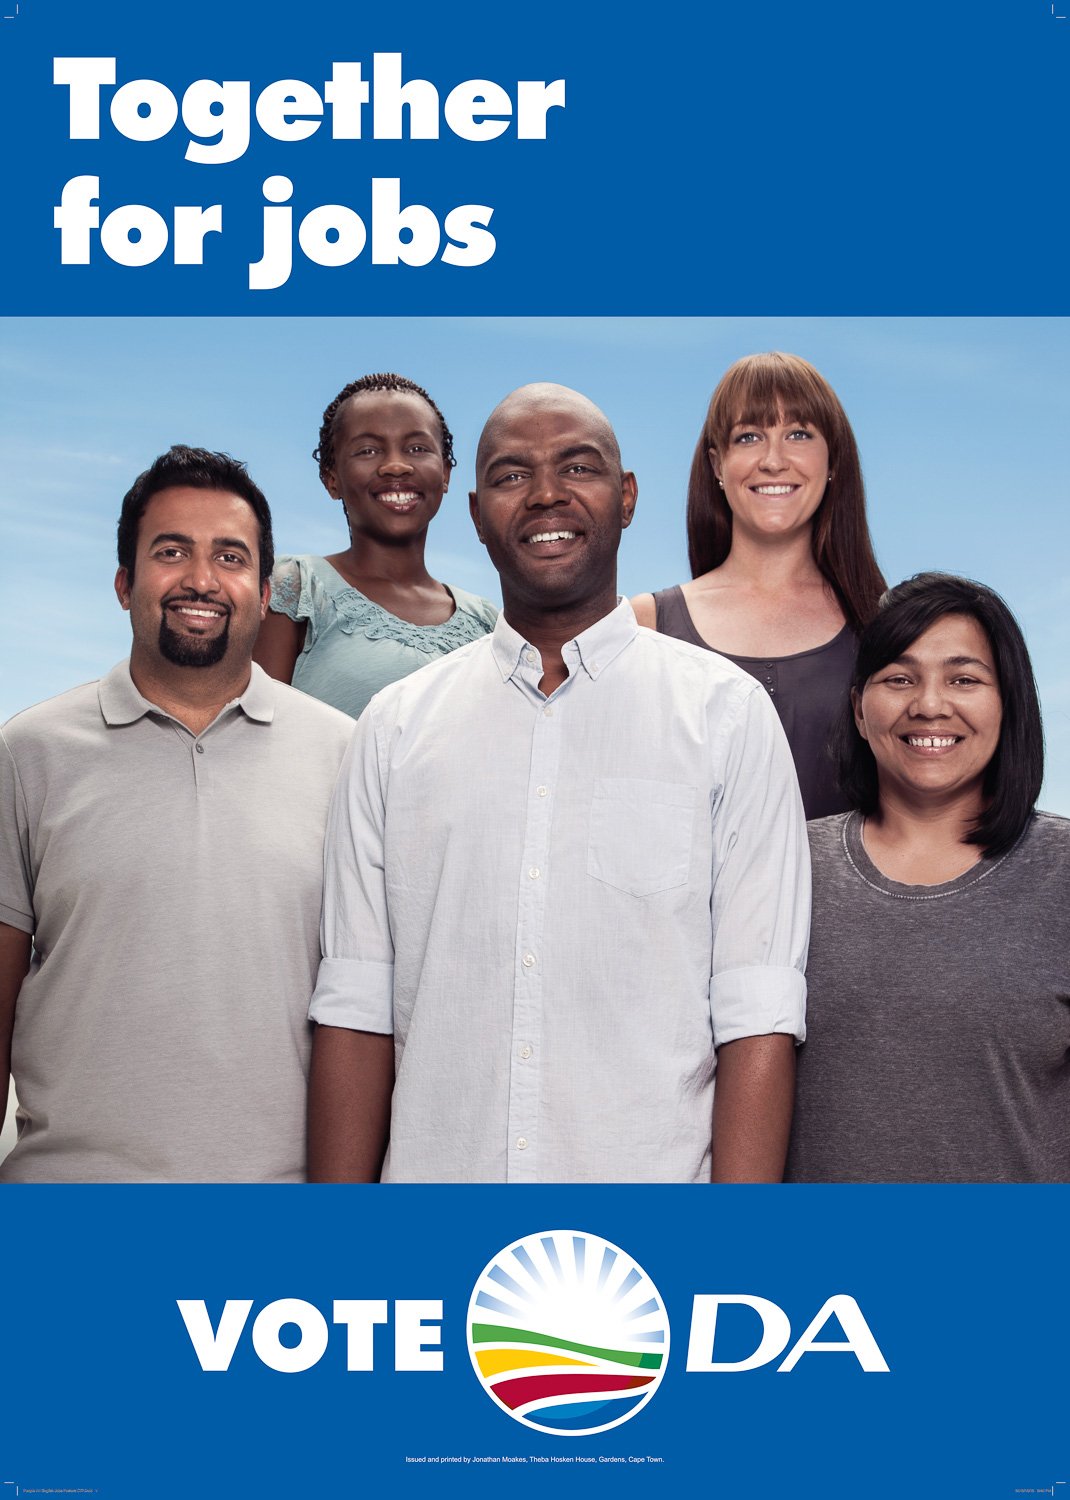 People A1 English - Together for Jobs Posters.jpg